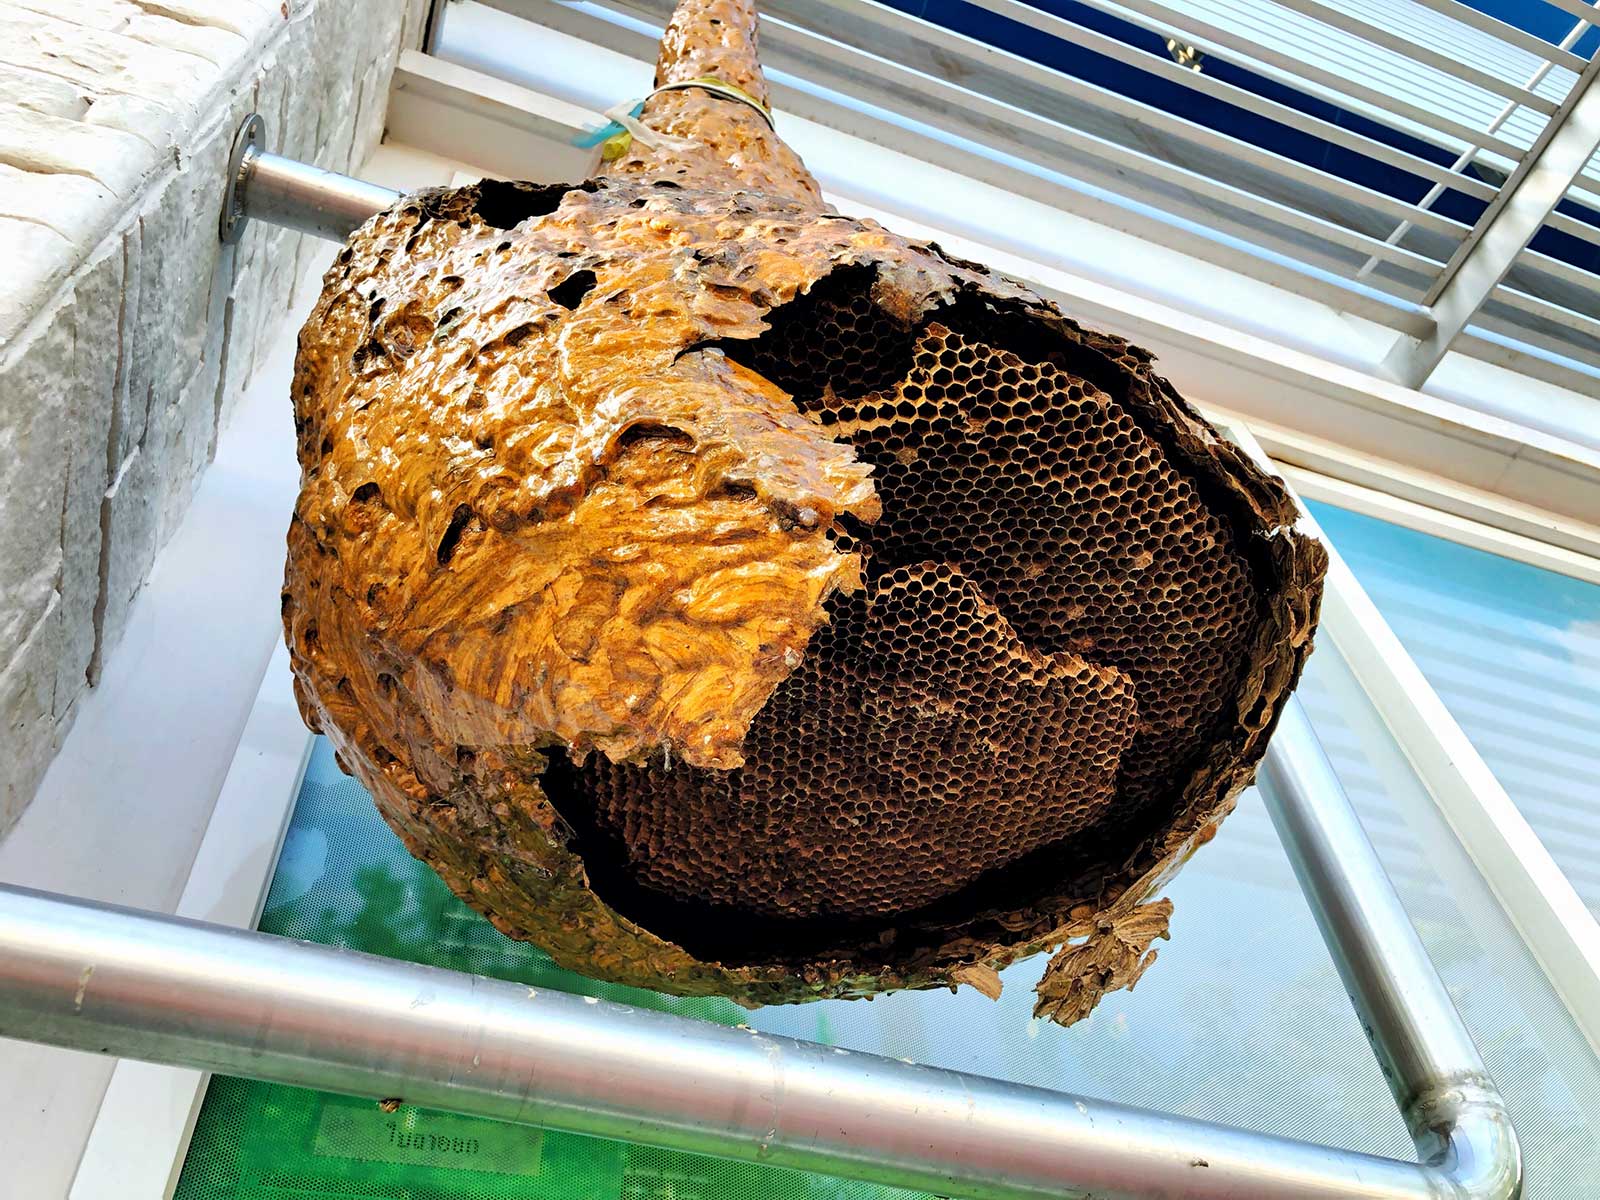 wasp nest removal